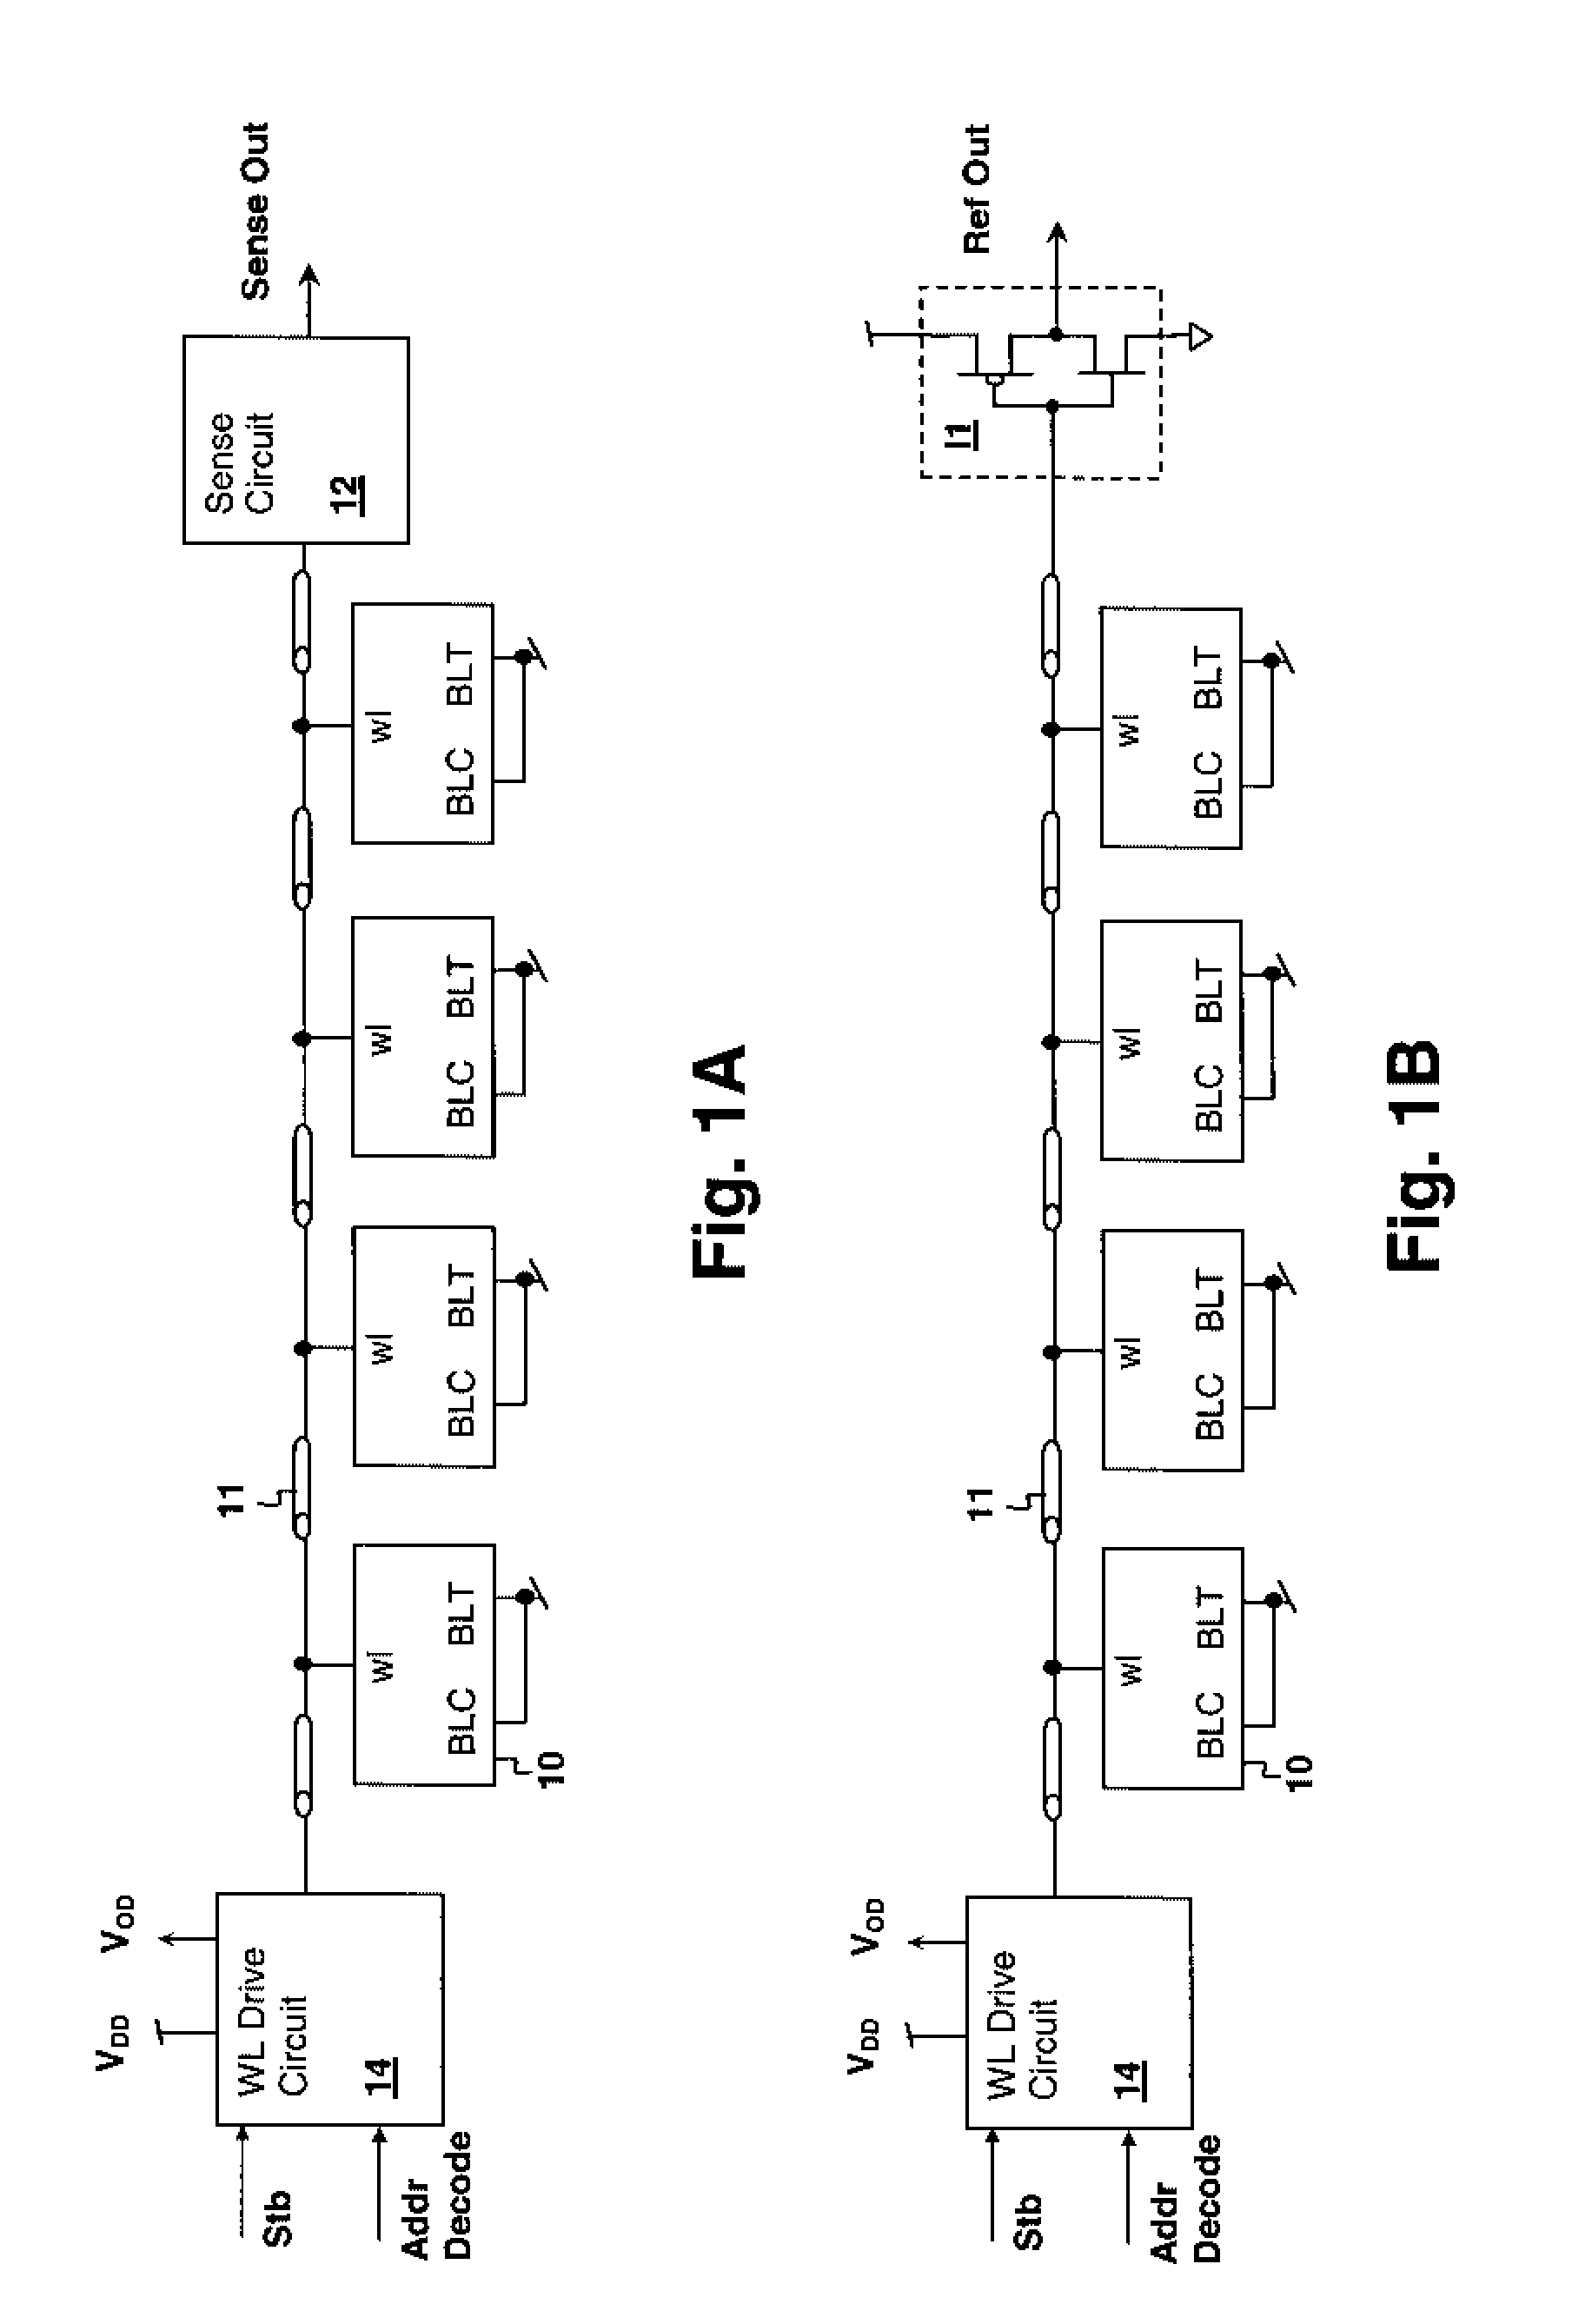 Storage Cell Design Evaluation Circuit Including a Wordline Timing and Cell Access Detection Circuit